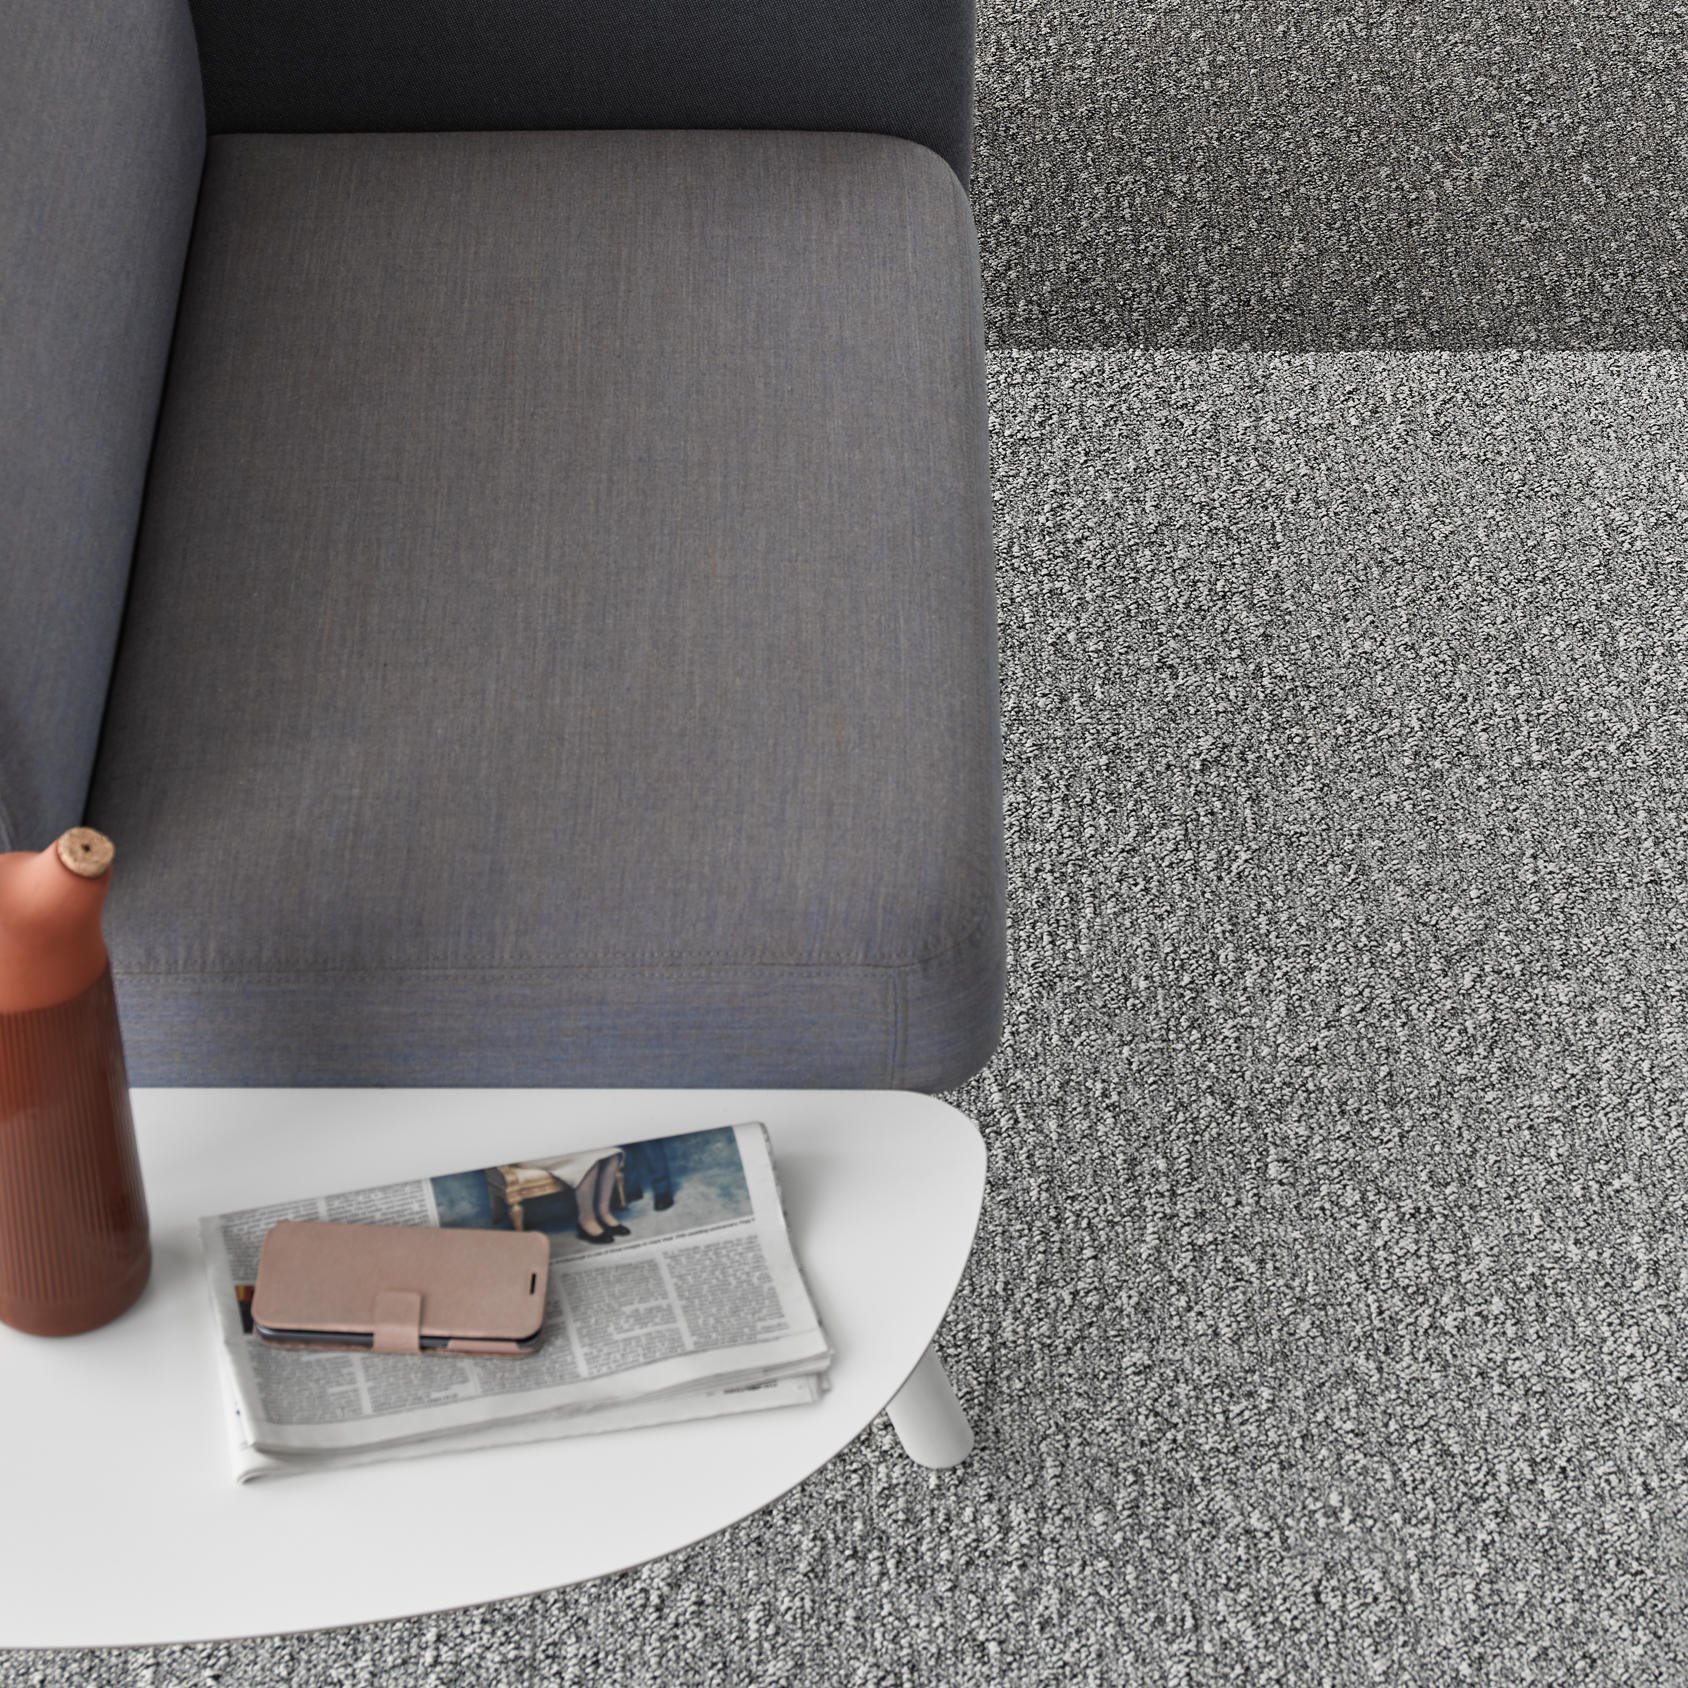 Desso Airmaster Earth Carpet Tile used in office space in dark grey